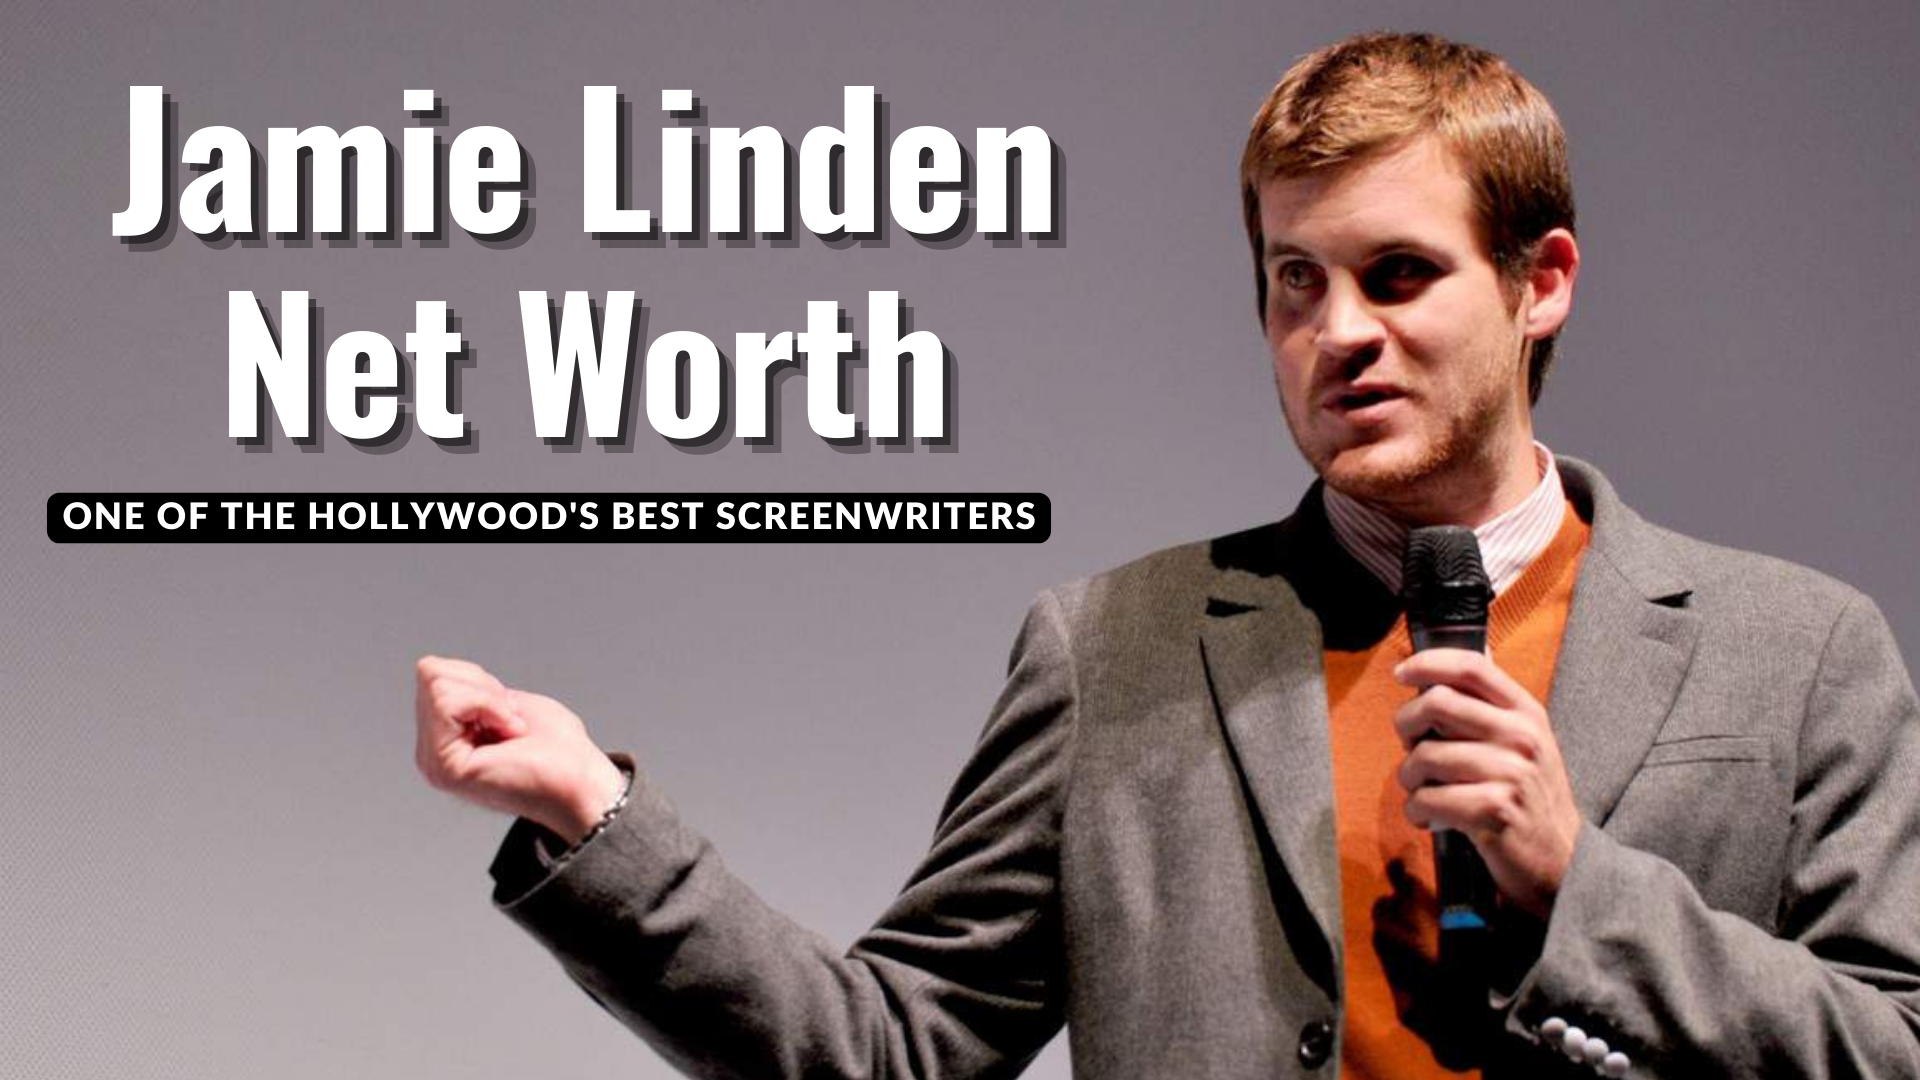 Jamie Linden Net Worth - One Of The Hollywood's Best Screenwriters